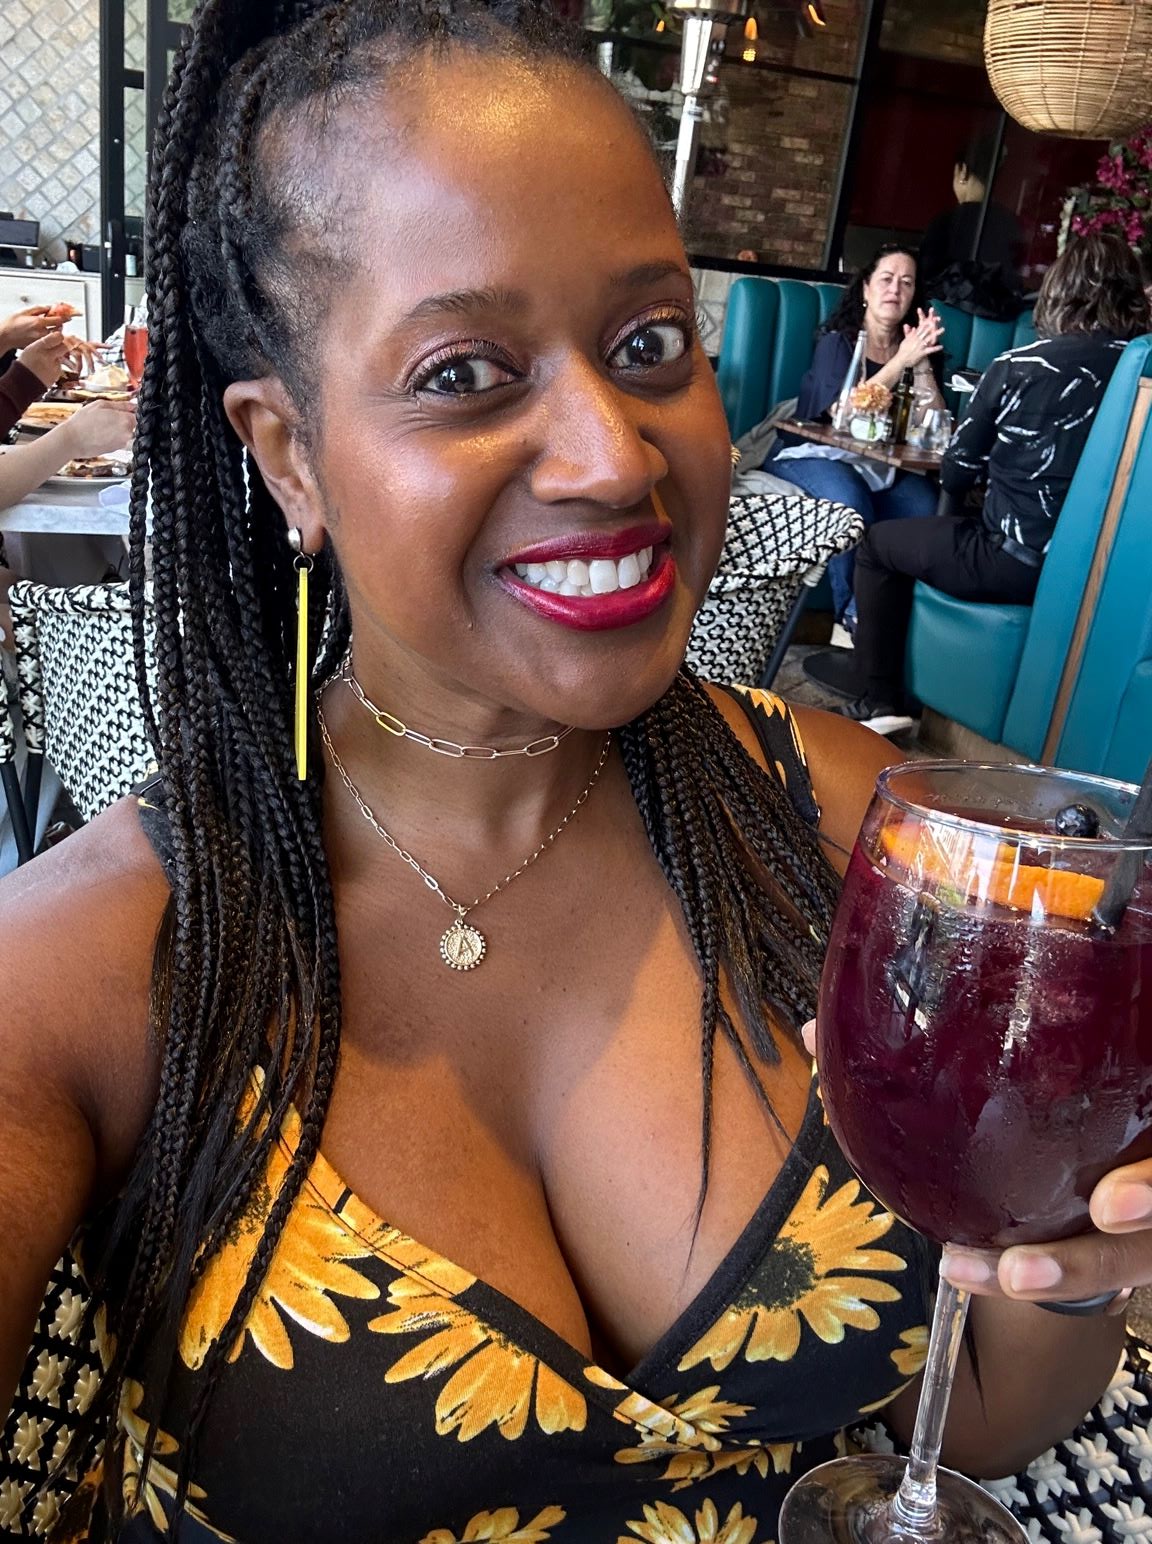 An image of Ariel holding a glass of sangria.